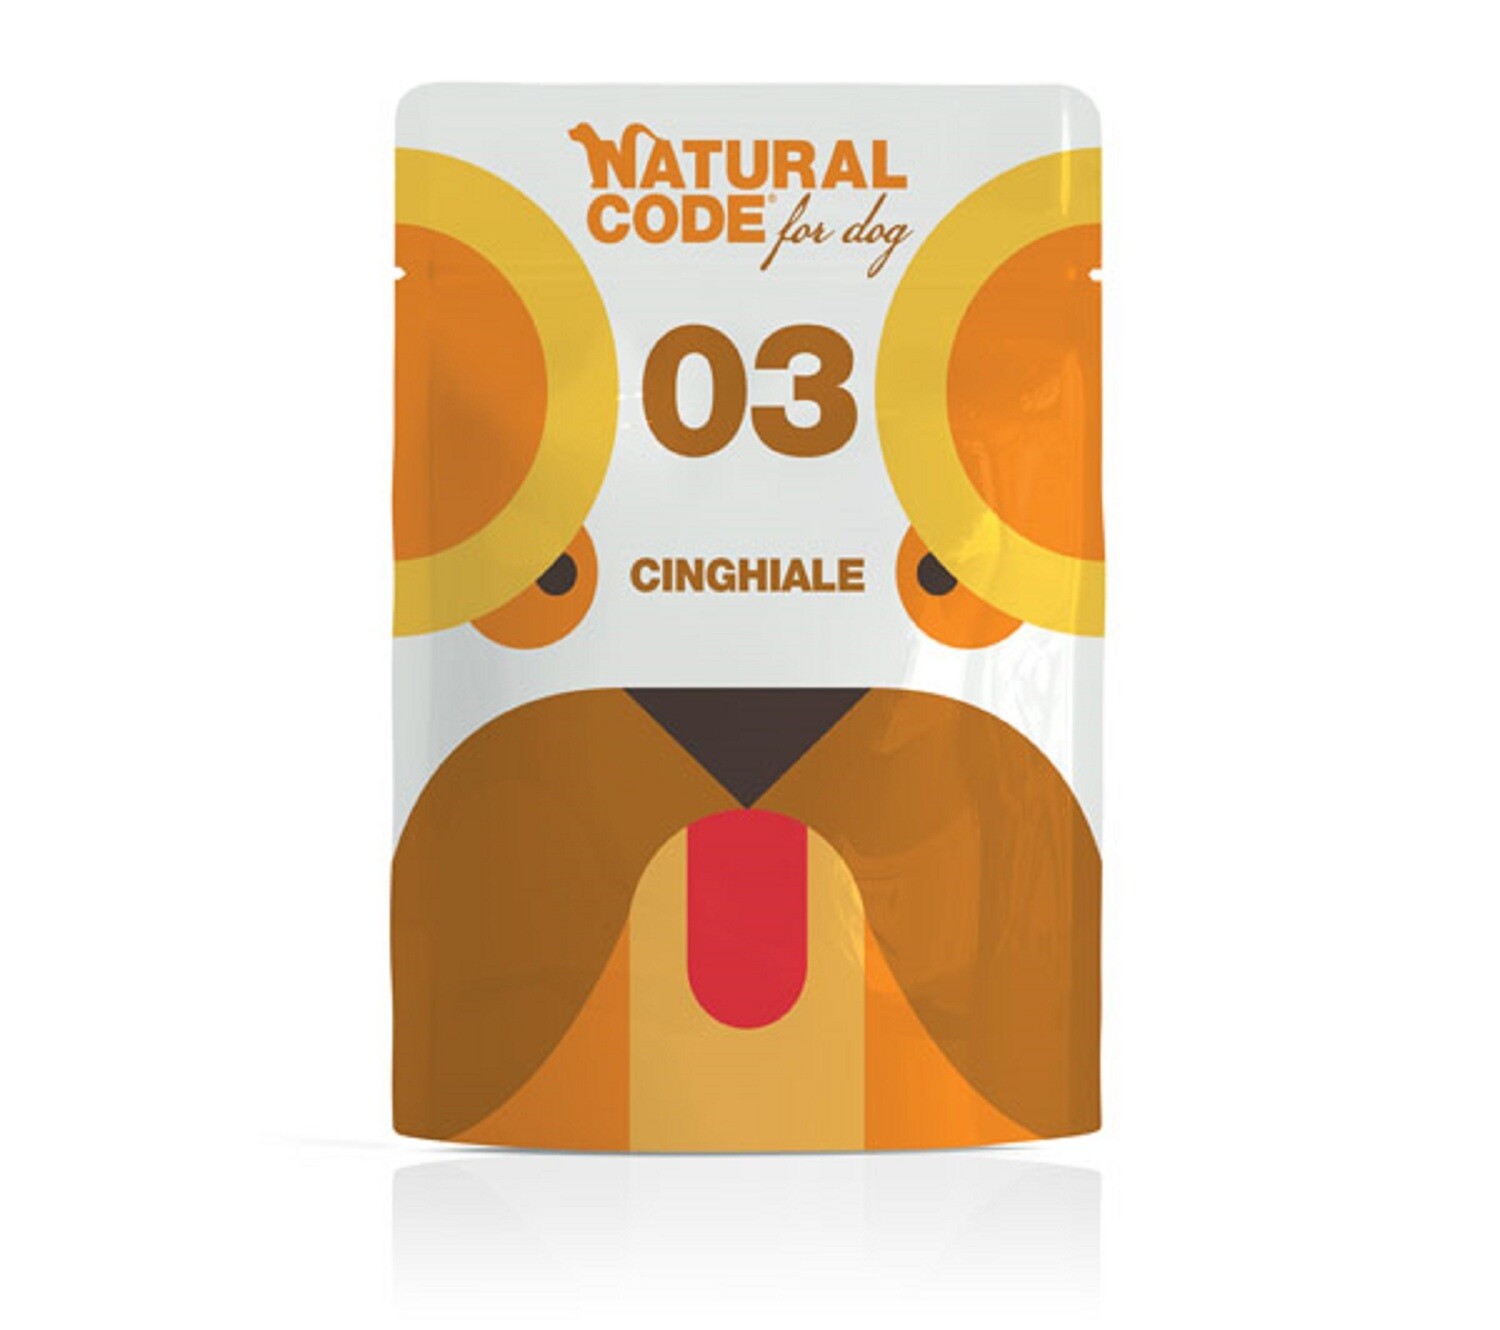 P03 Cinghiale Natural Code busta 300g